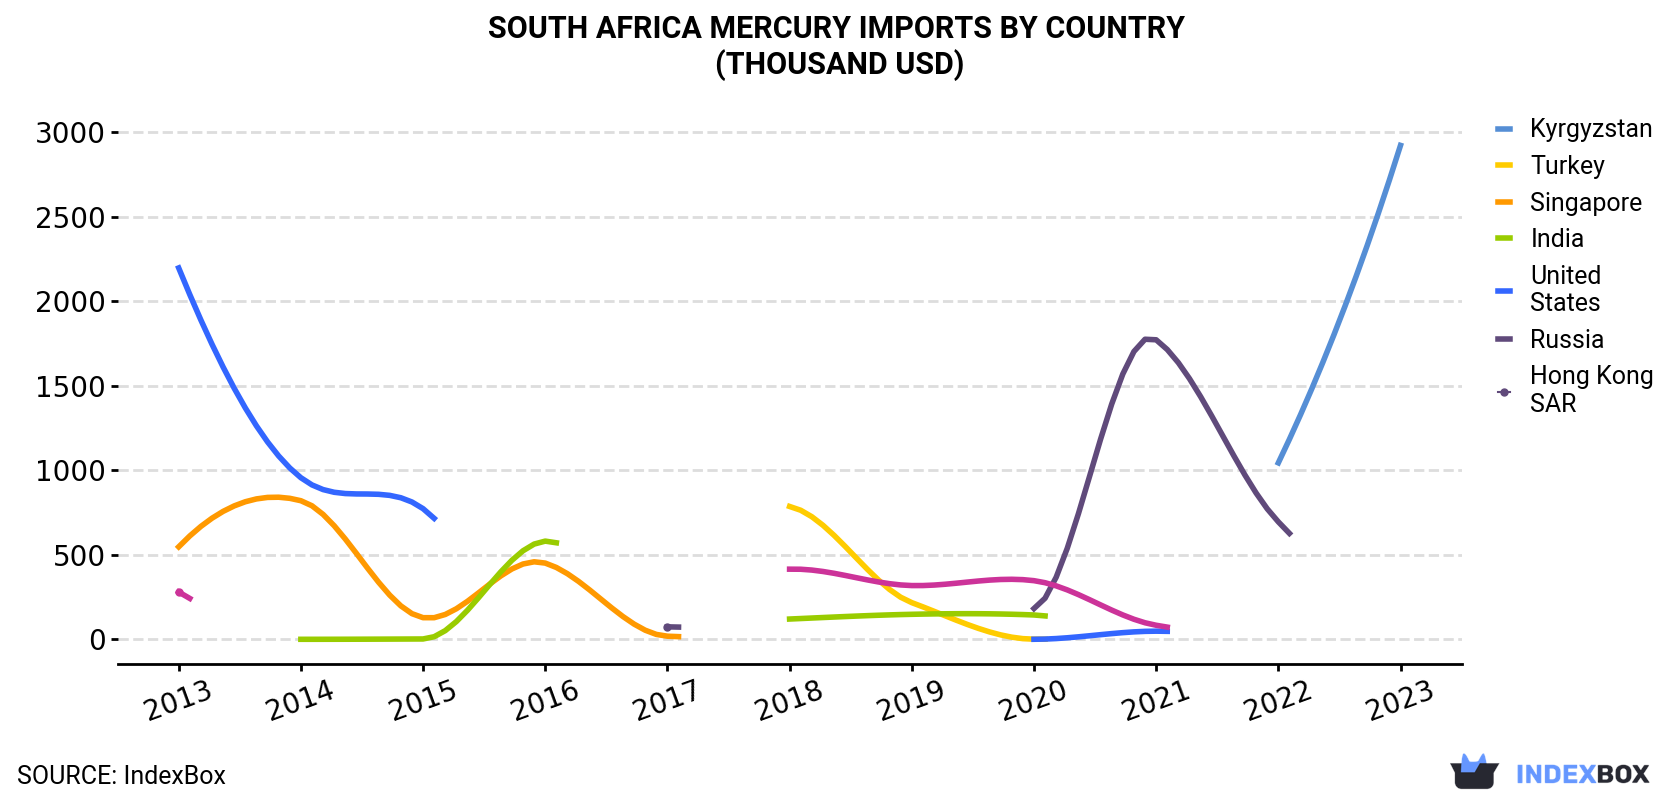 South Africa Mercury Imports By Country (Thousand USD)